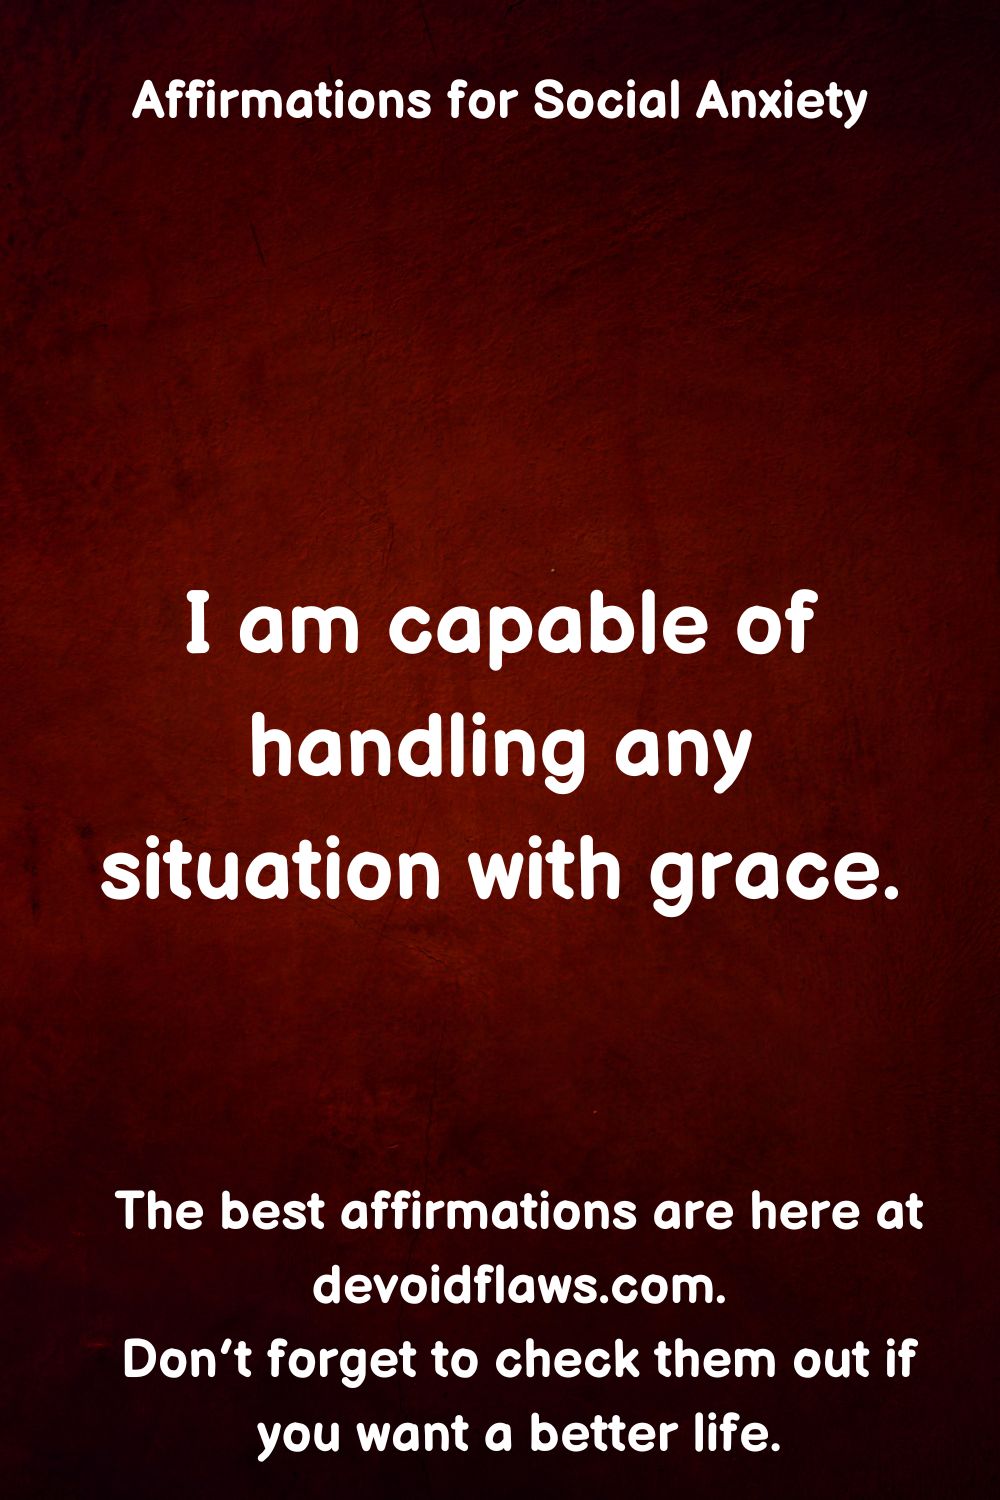 125 Affirmations to Overcome Social Anxiety